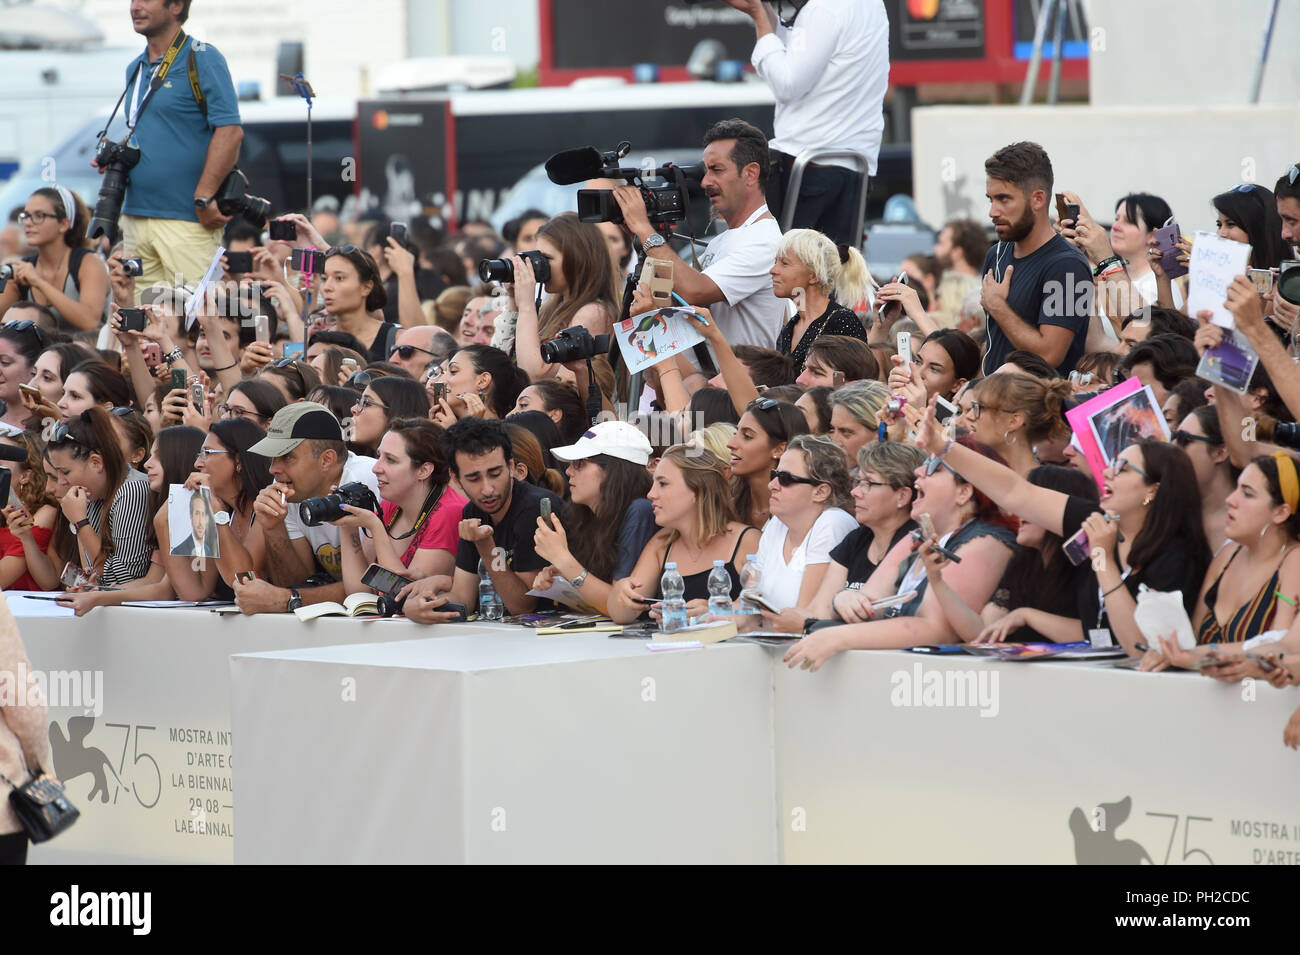 29.08.2018, Italy, Venice: Fans are waiting for autographs at the ...